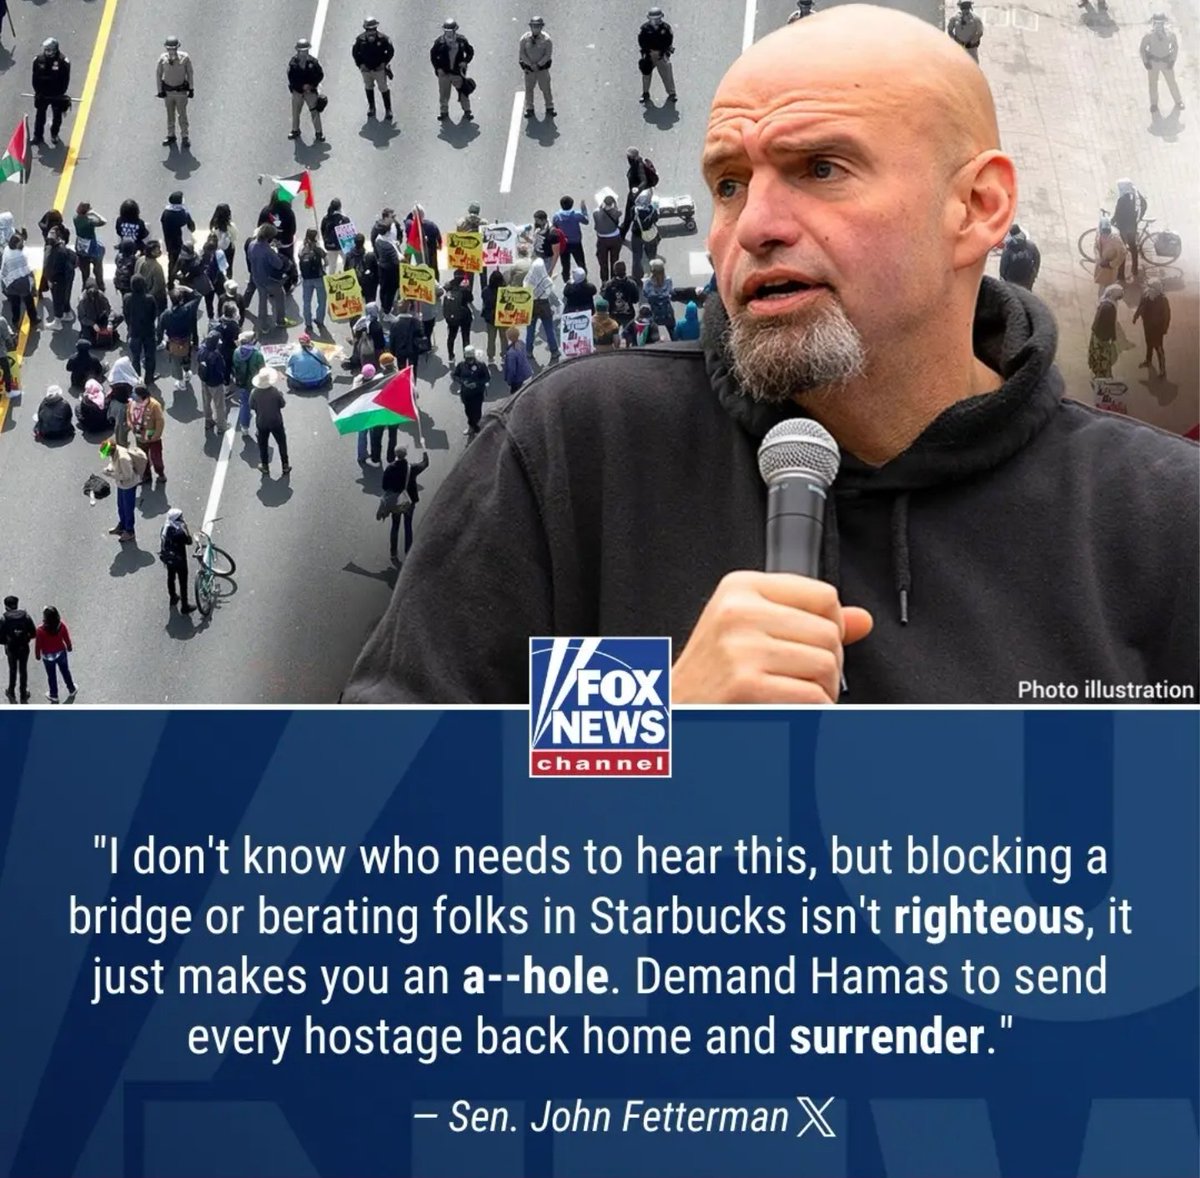 Sorry-not-sorry but Fetterman has turned into a based bro